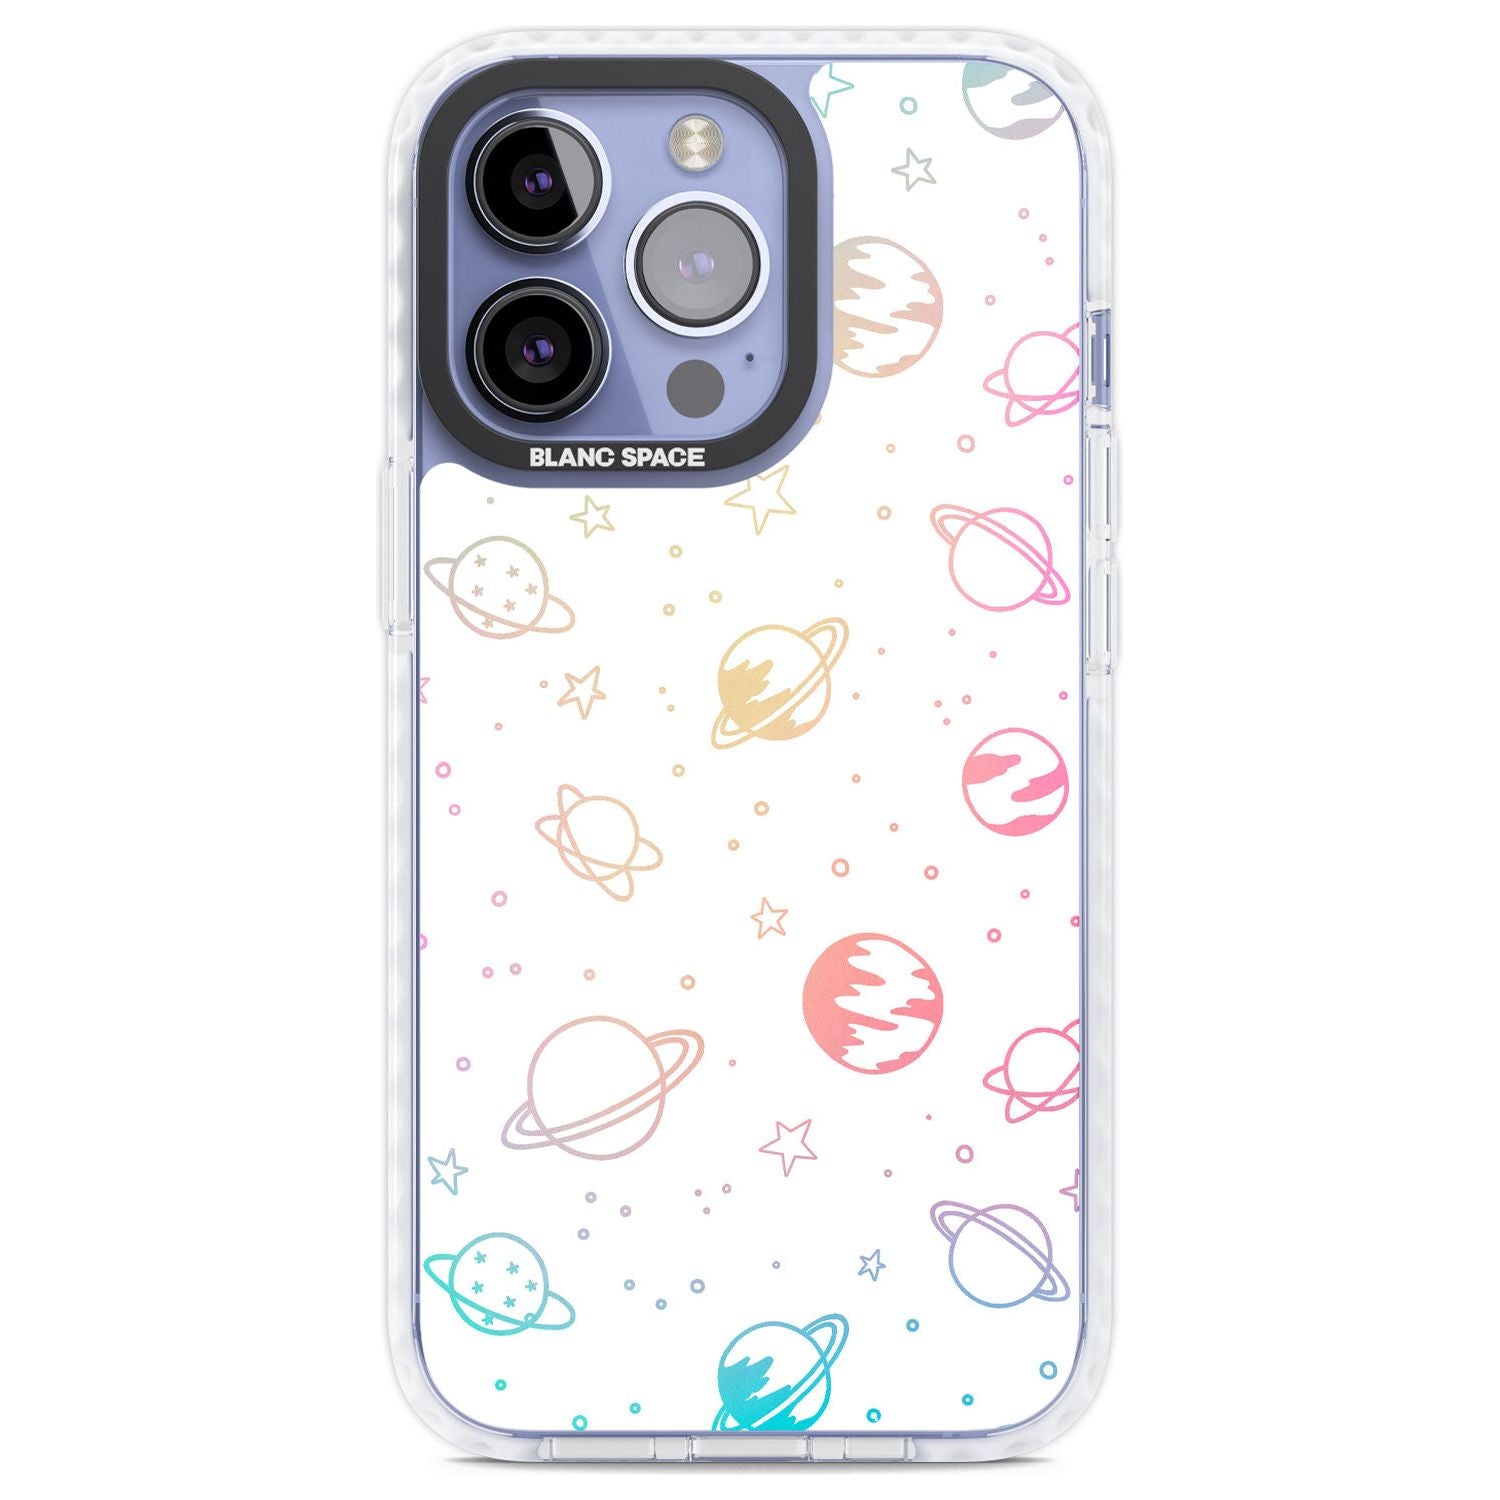 Cosmic Outer Space Design Pastels on White Phone Case iPhone 13 Pro / Impact Case,iPhone 14 Pro / Impact Case,iPhone 15 Pro Max / Impact Case,iPhone 15 Pro / Impact Case Blanc Space